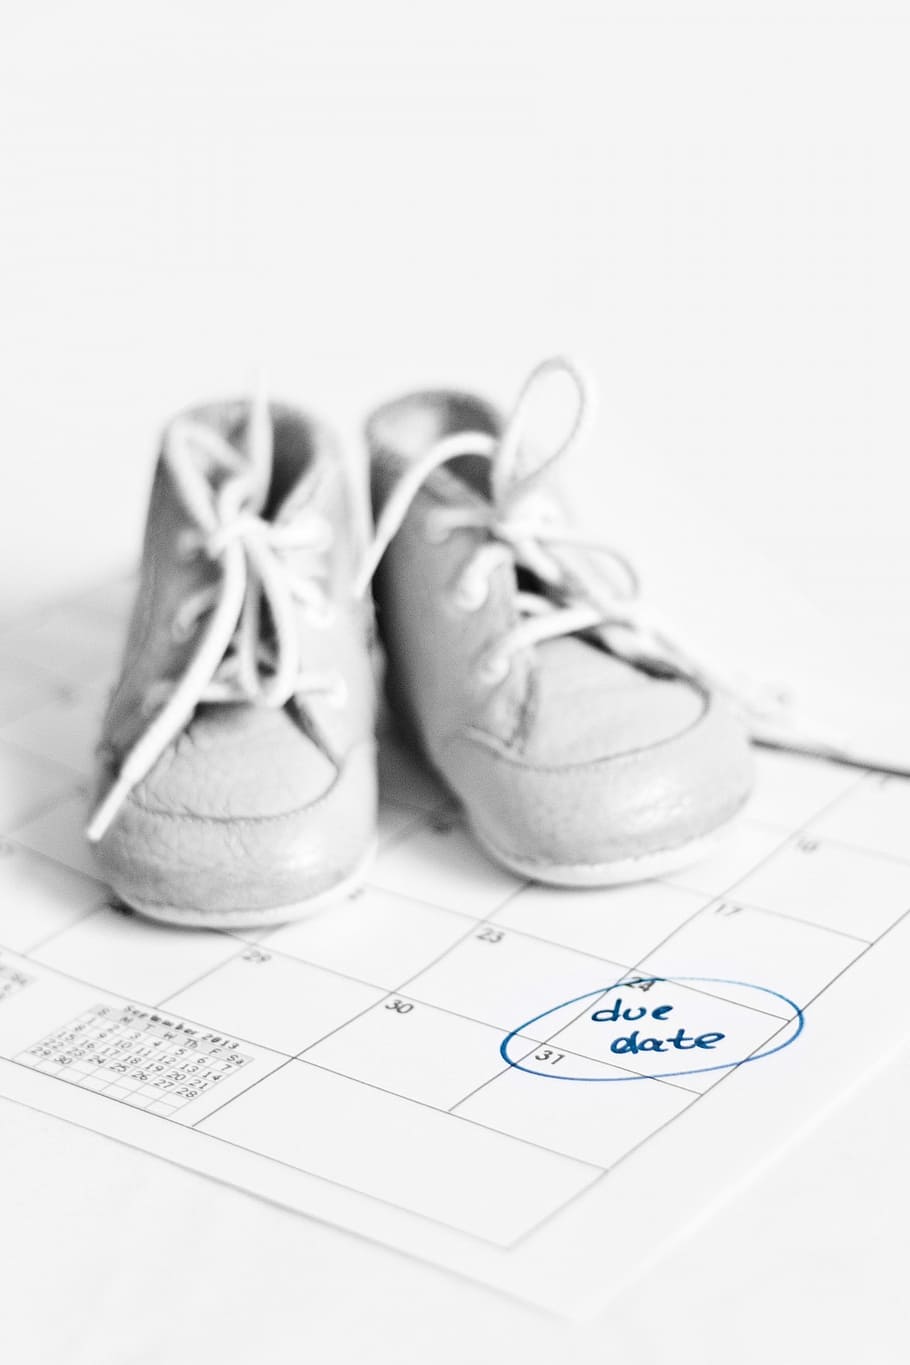 gray, leather lace-up shoes, white, planner, due, date, calendar, pregnant, pregnancy, expecting